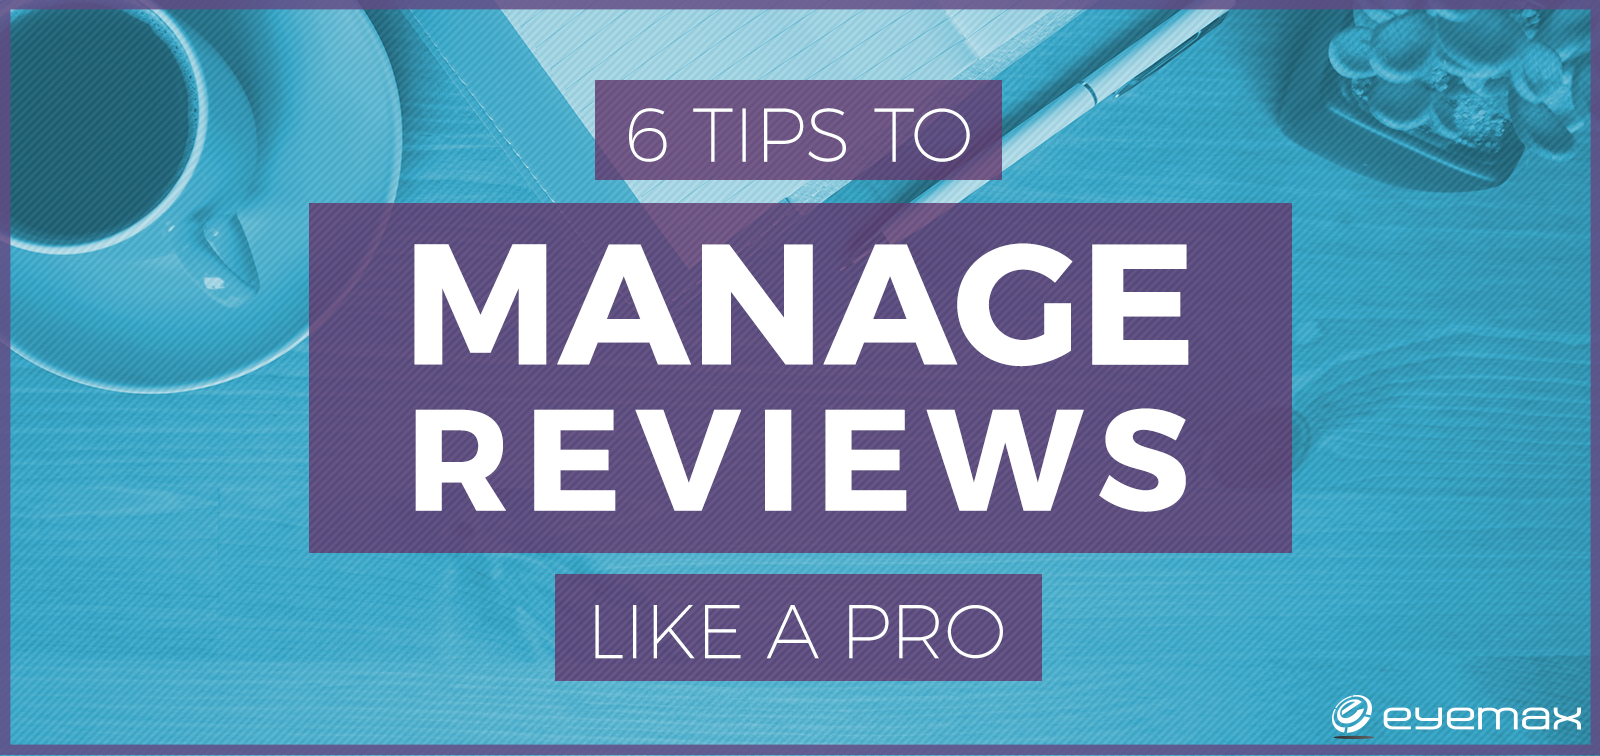 6 Tips to Manage Online Reviews like a Pro